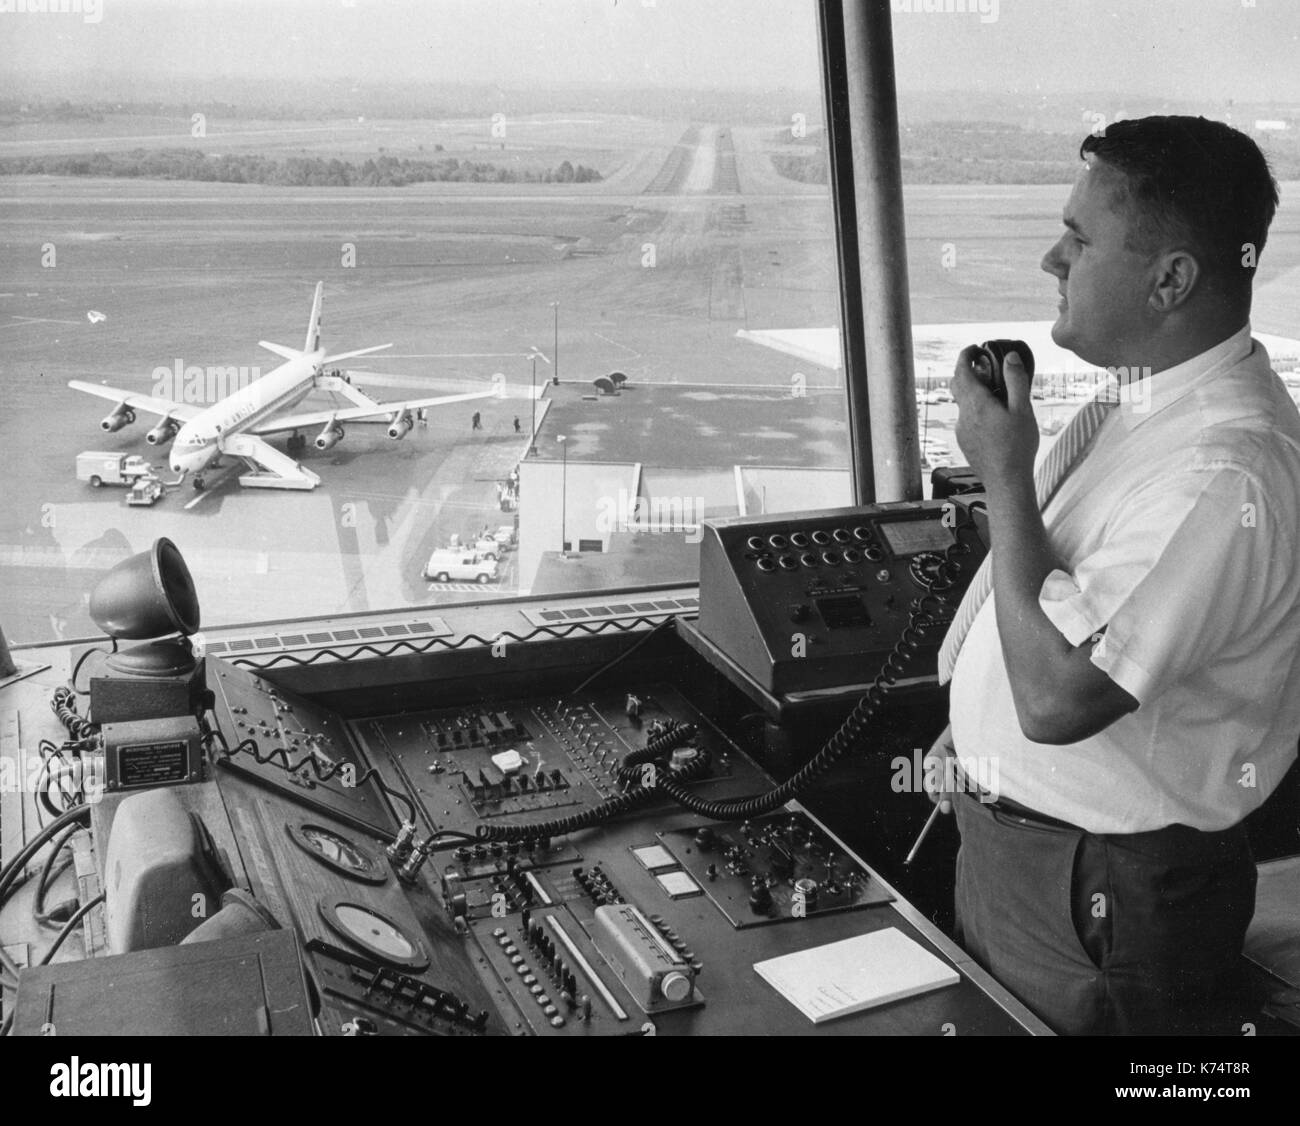 A Federal Aviation Agency (FAA) Air Traffic Controller guides a plane to a safe landing, 1965. Stock Photo